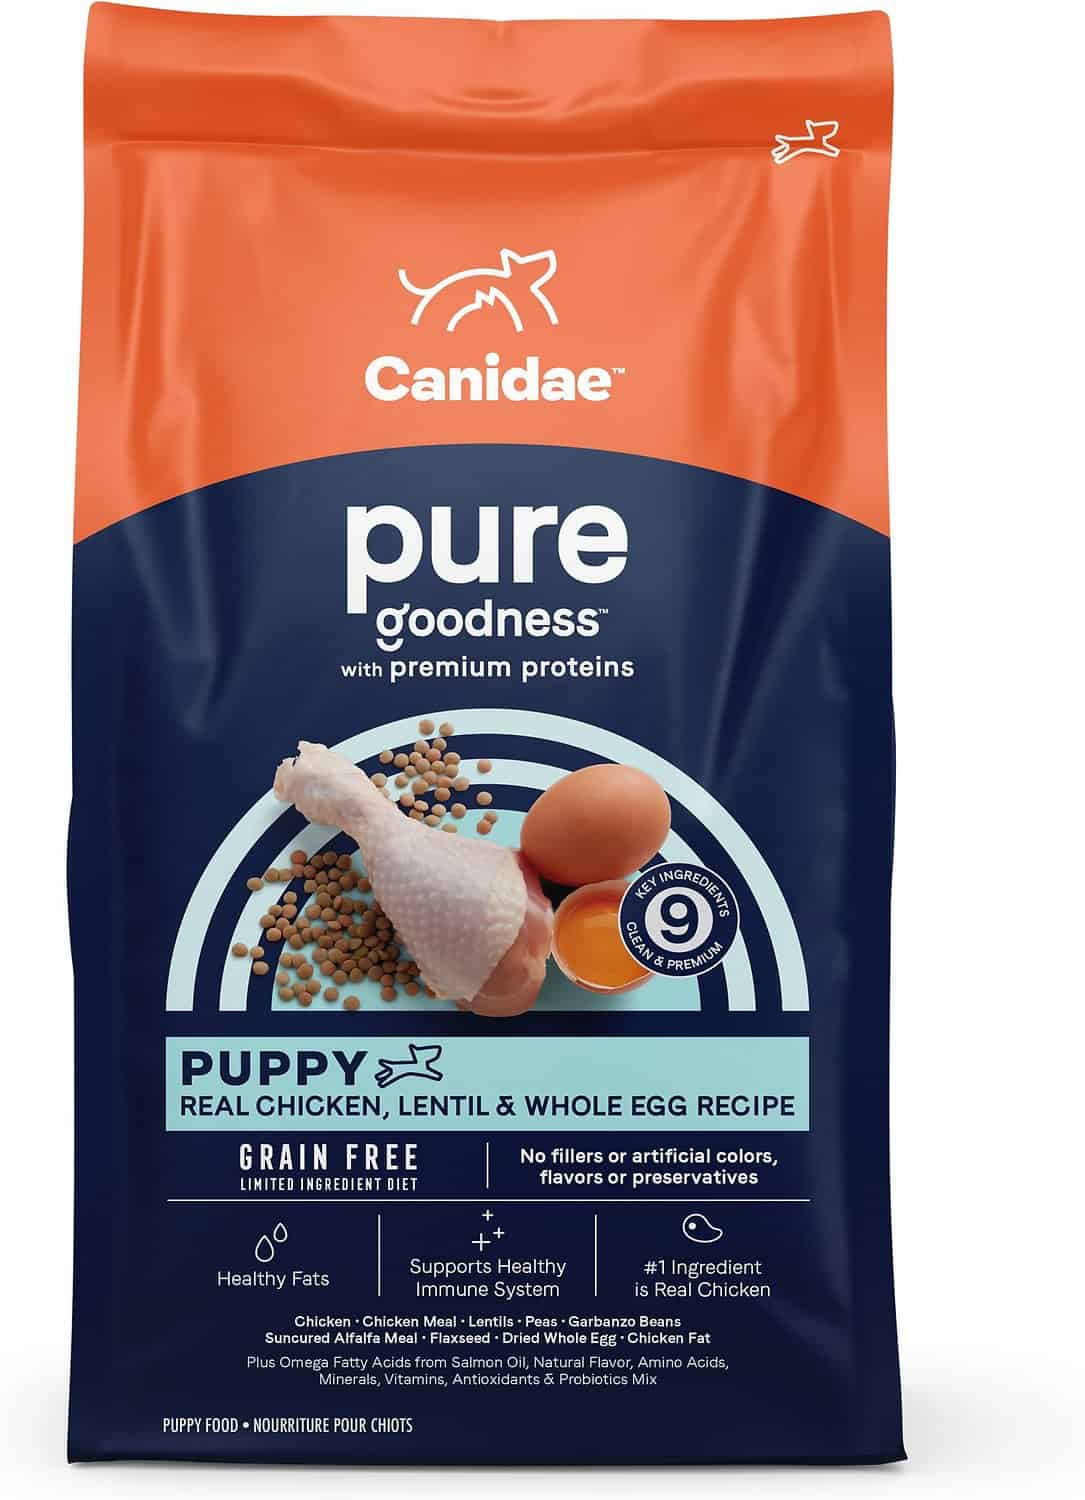 Canidae Grain-Free Limited Ingredient